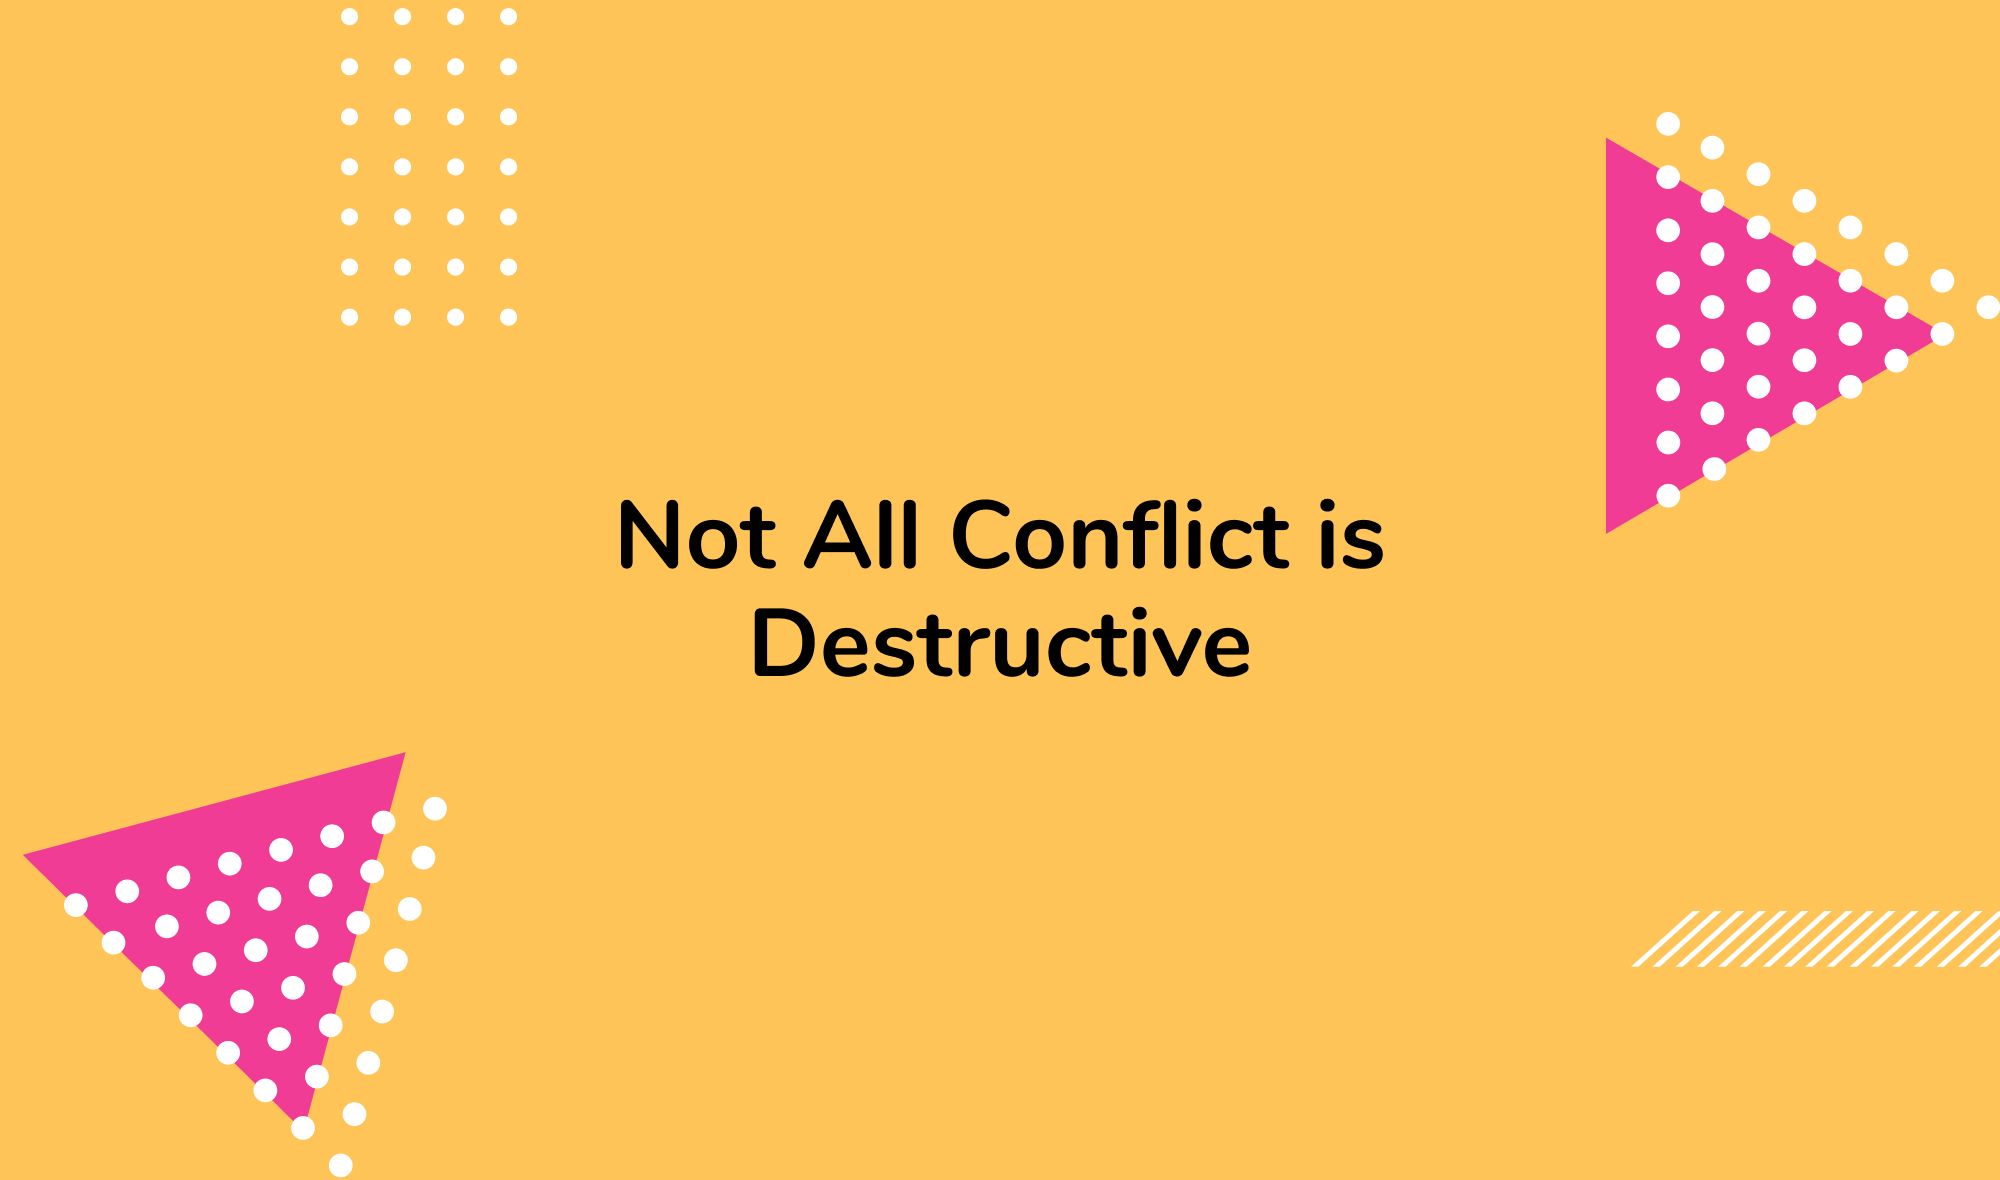 Not All Conflict is Destructive